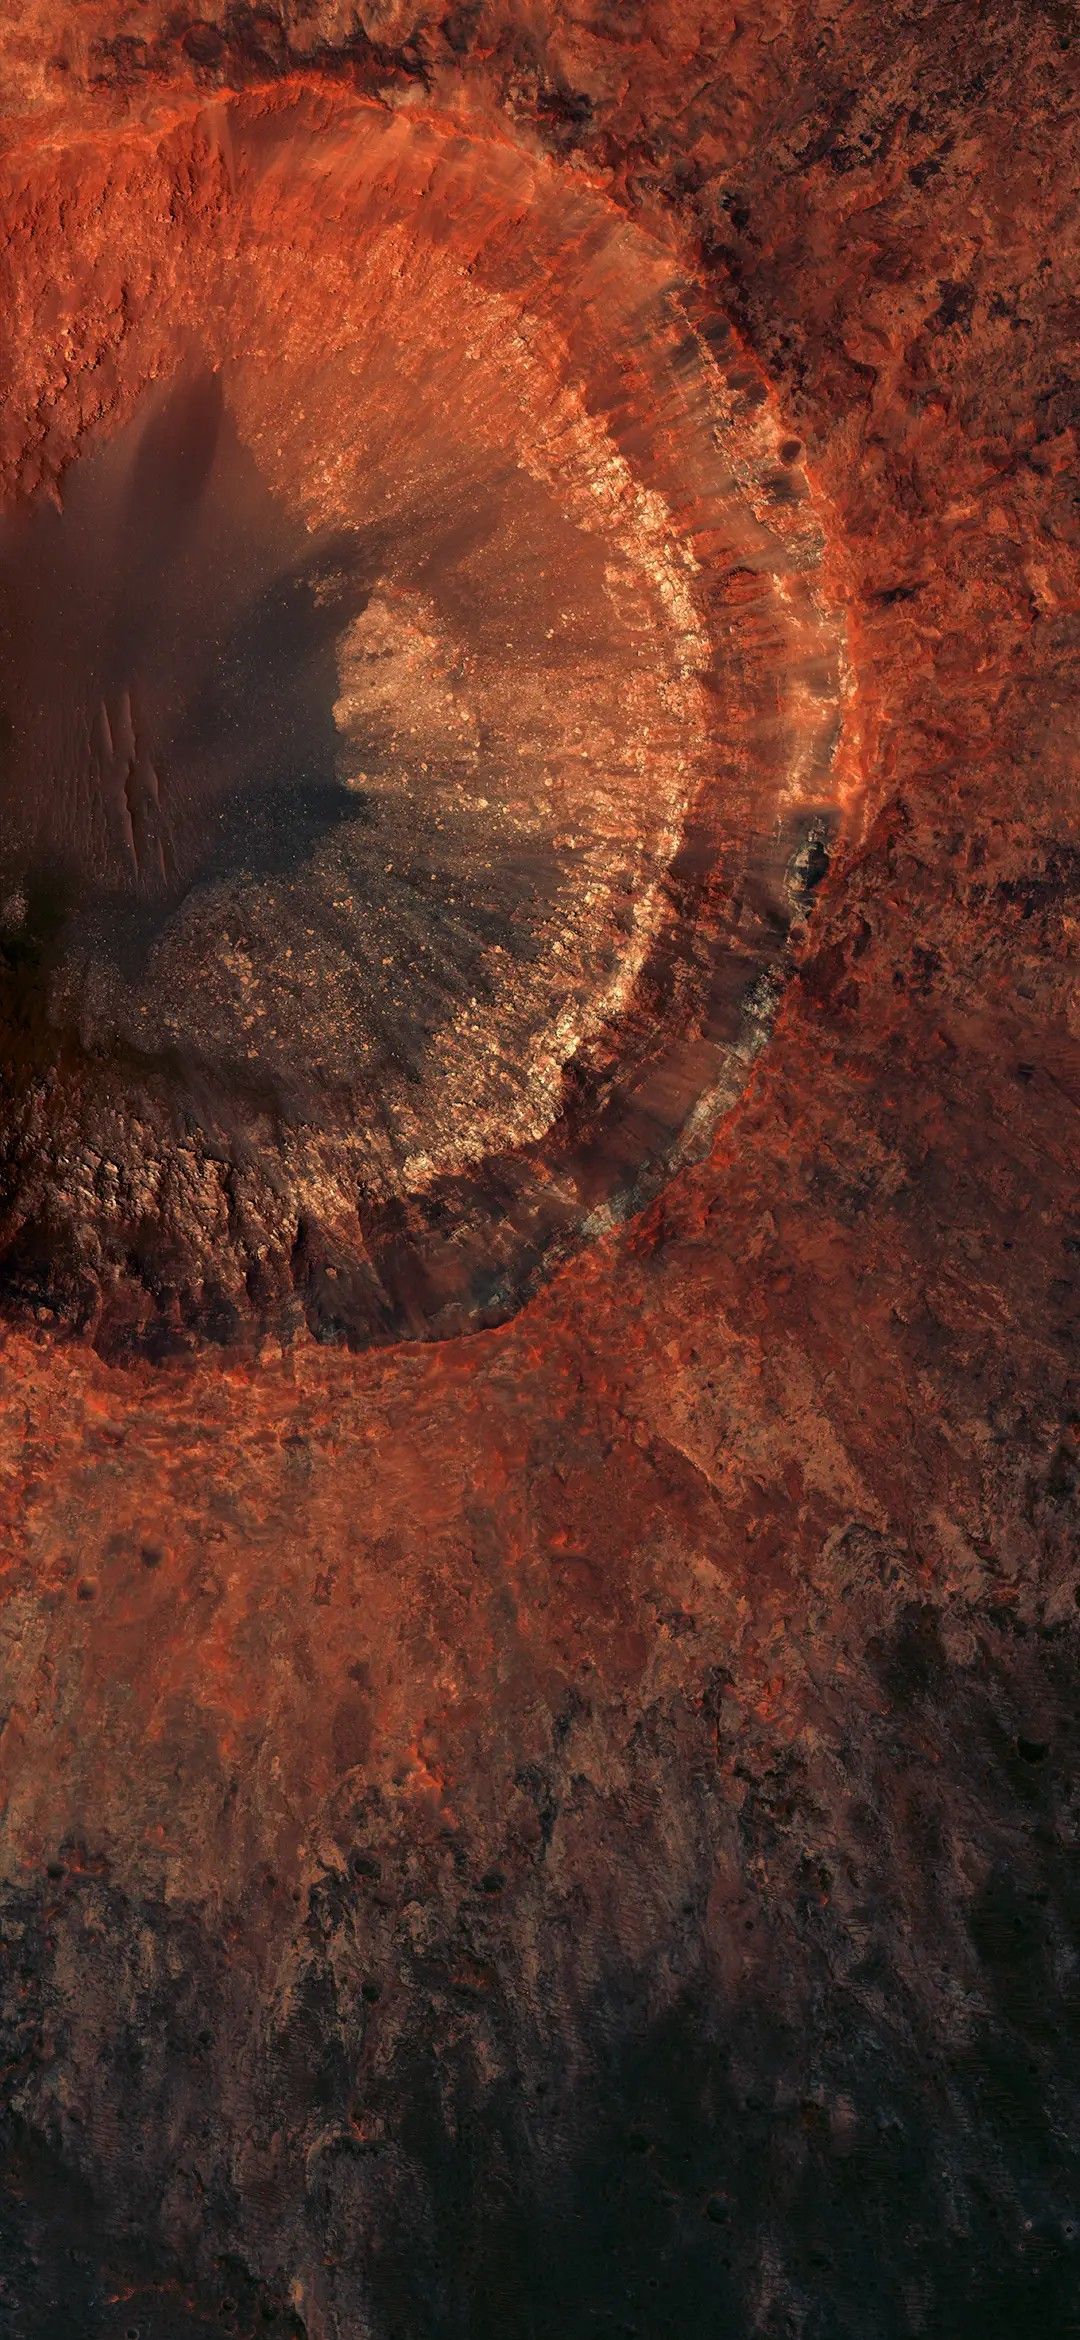 Mars Surface iPhone Wallpapers - Wallpaper Cave